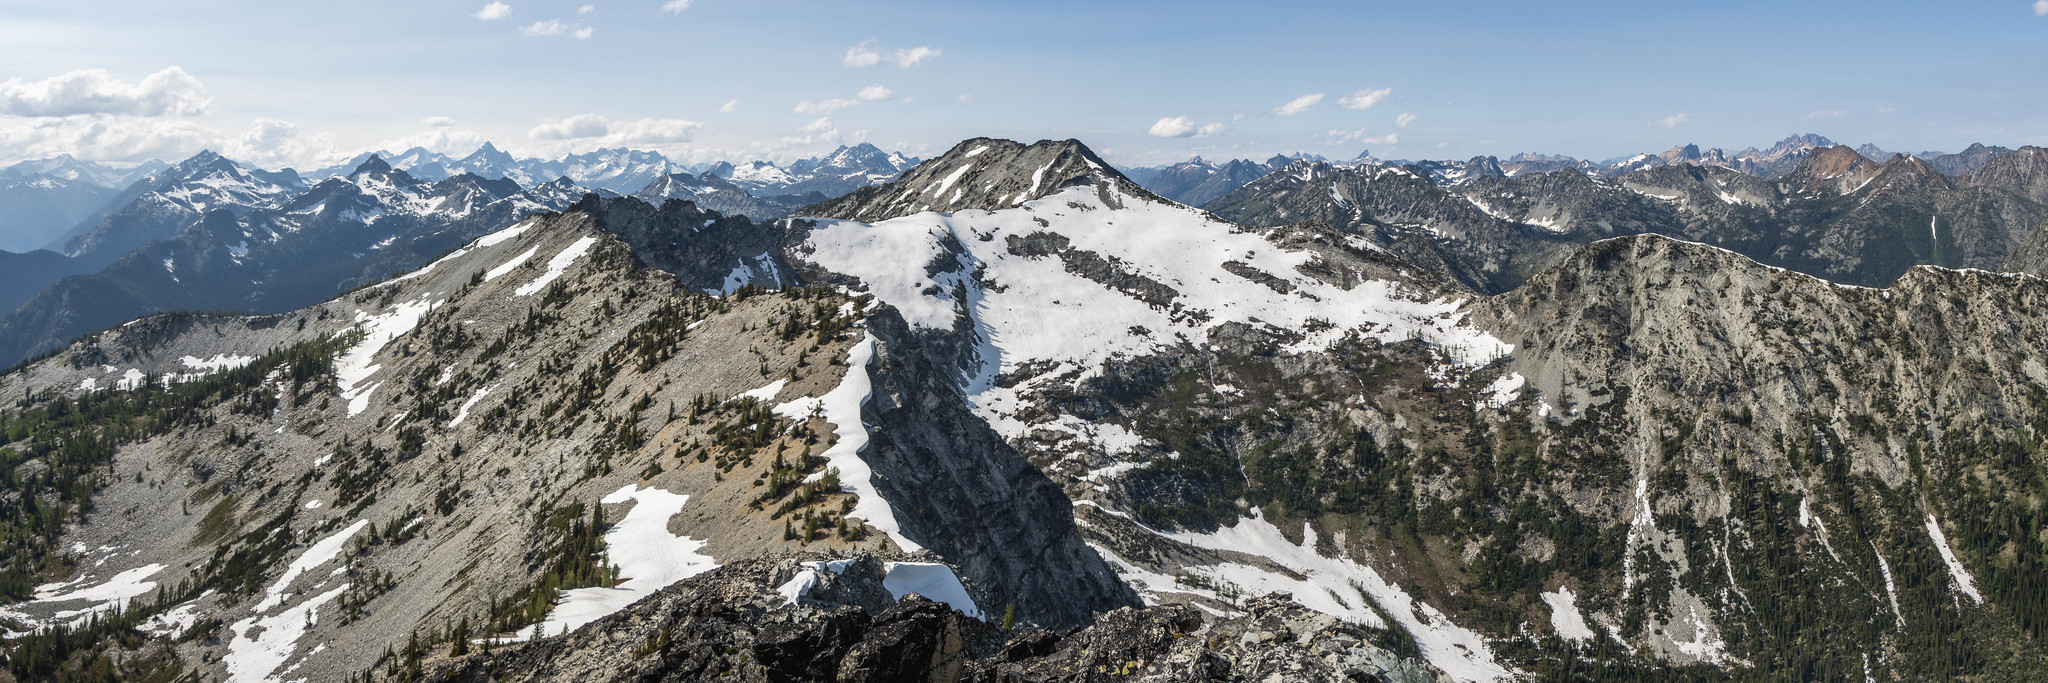 Northern panoramic view from West Level Peak